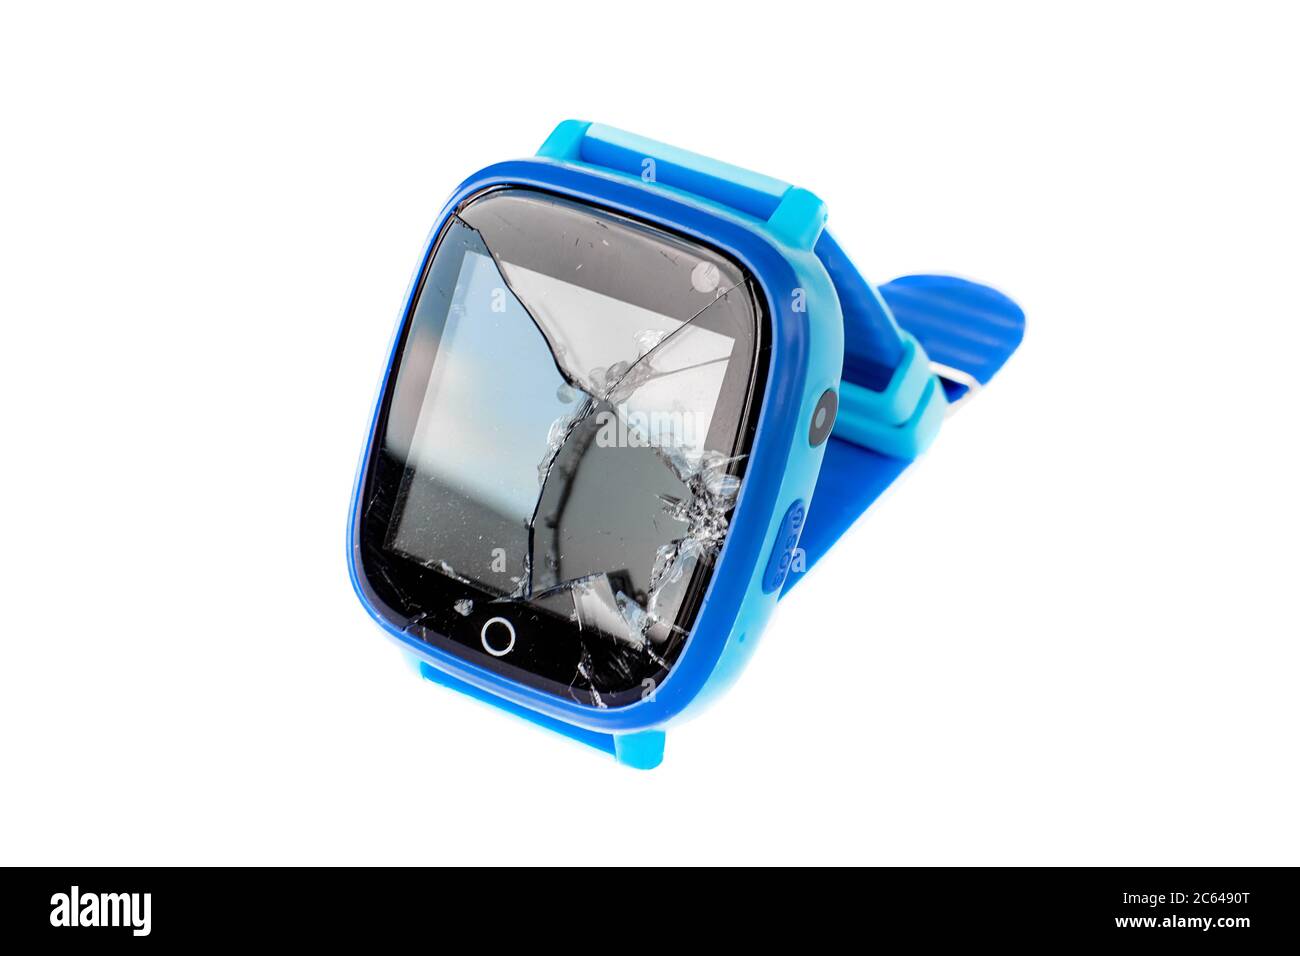 Multicolored kids smart watch phone with broken screen isolated on white background. Technology for children. Wearable gadget concept. Top view, close Stock Photo